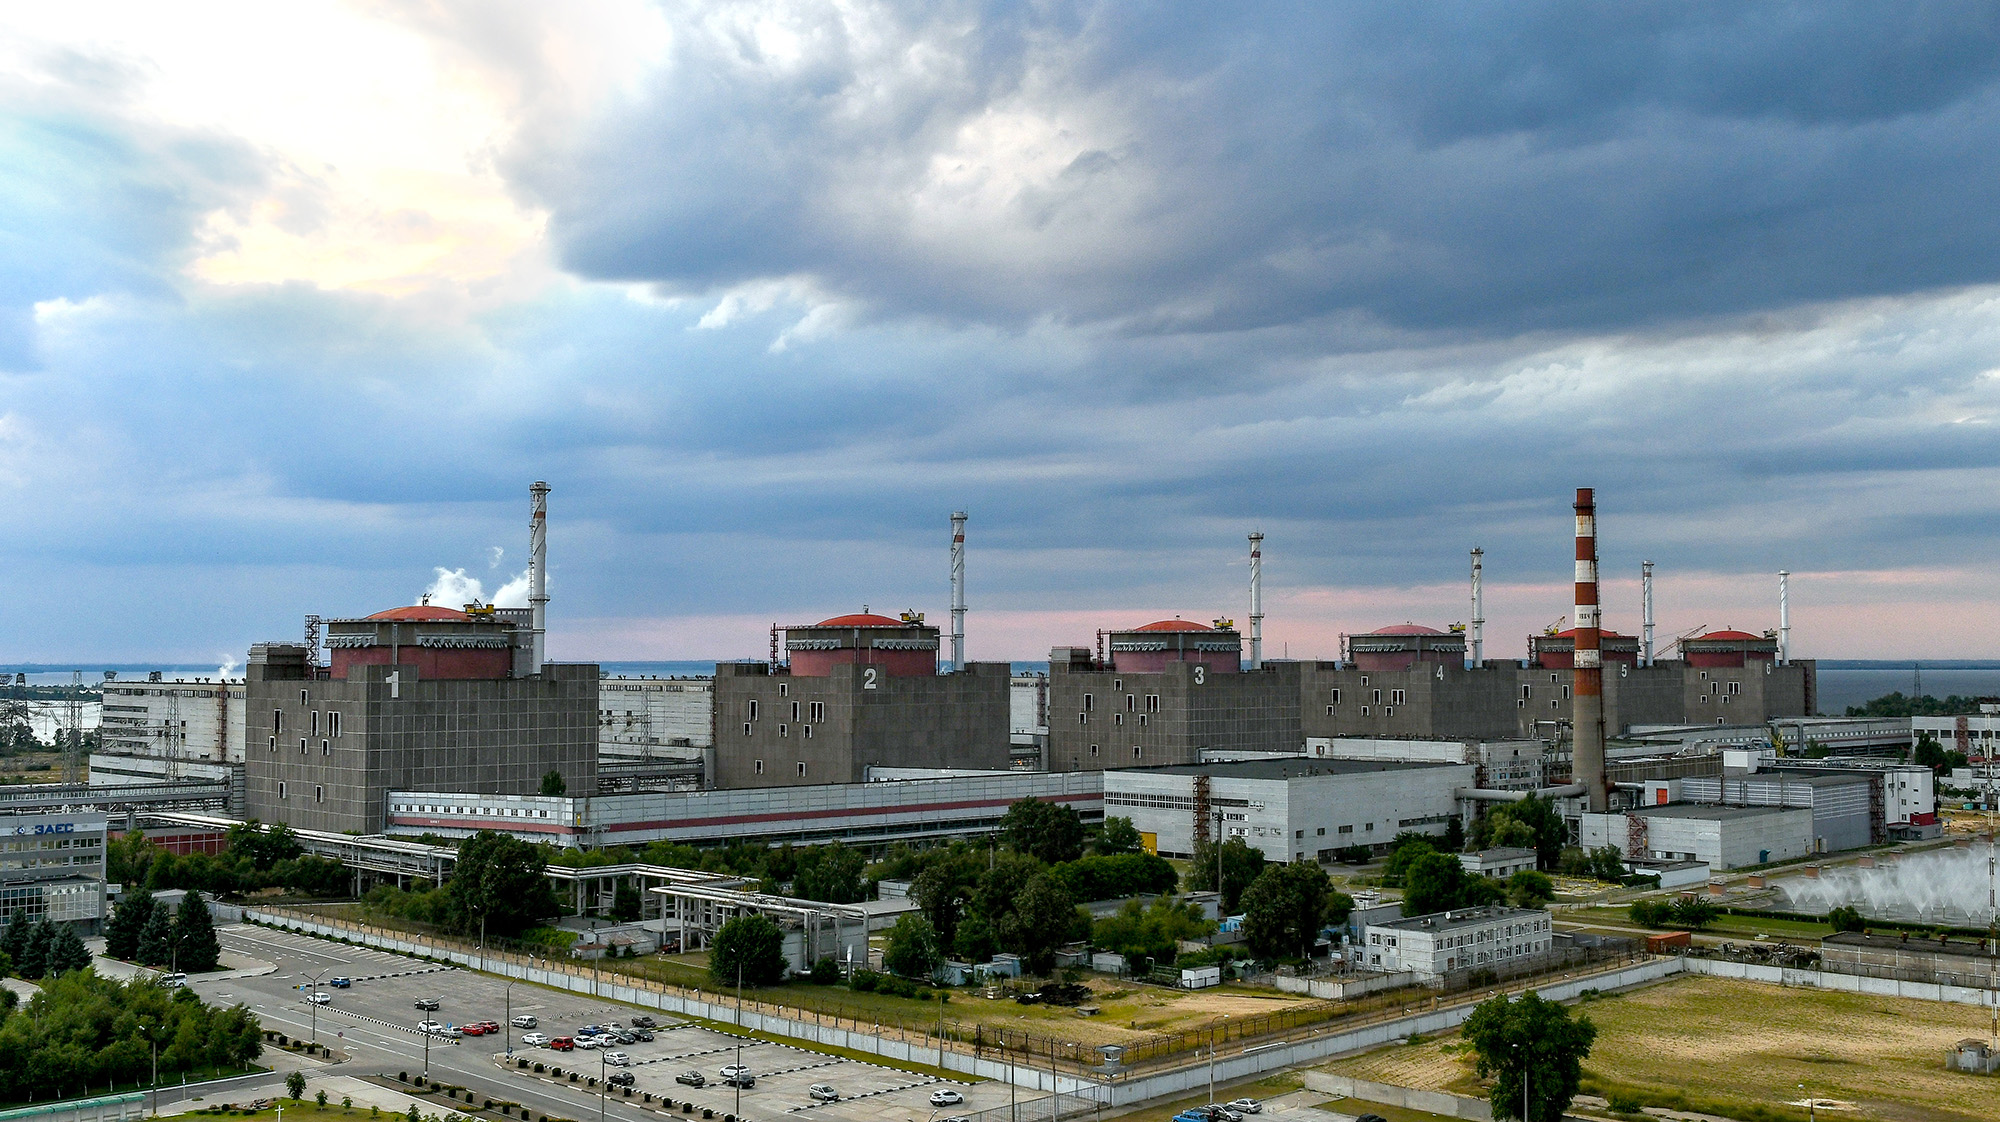 Zaporizhia Nuclear Power Station, the largest nuclear plant in Europe and among the top 10 largest in the world,  in Enerhodar, Zaporizhzhia Region, southeastern Ukraine, on July 9, 2019.